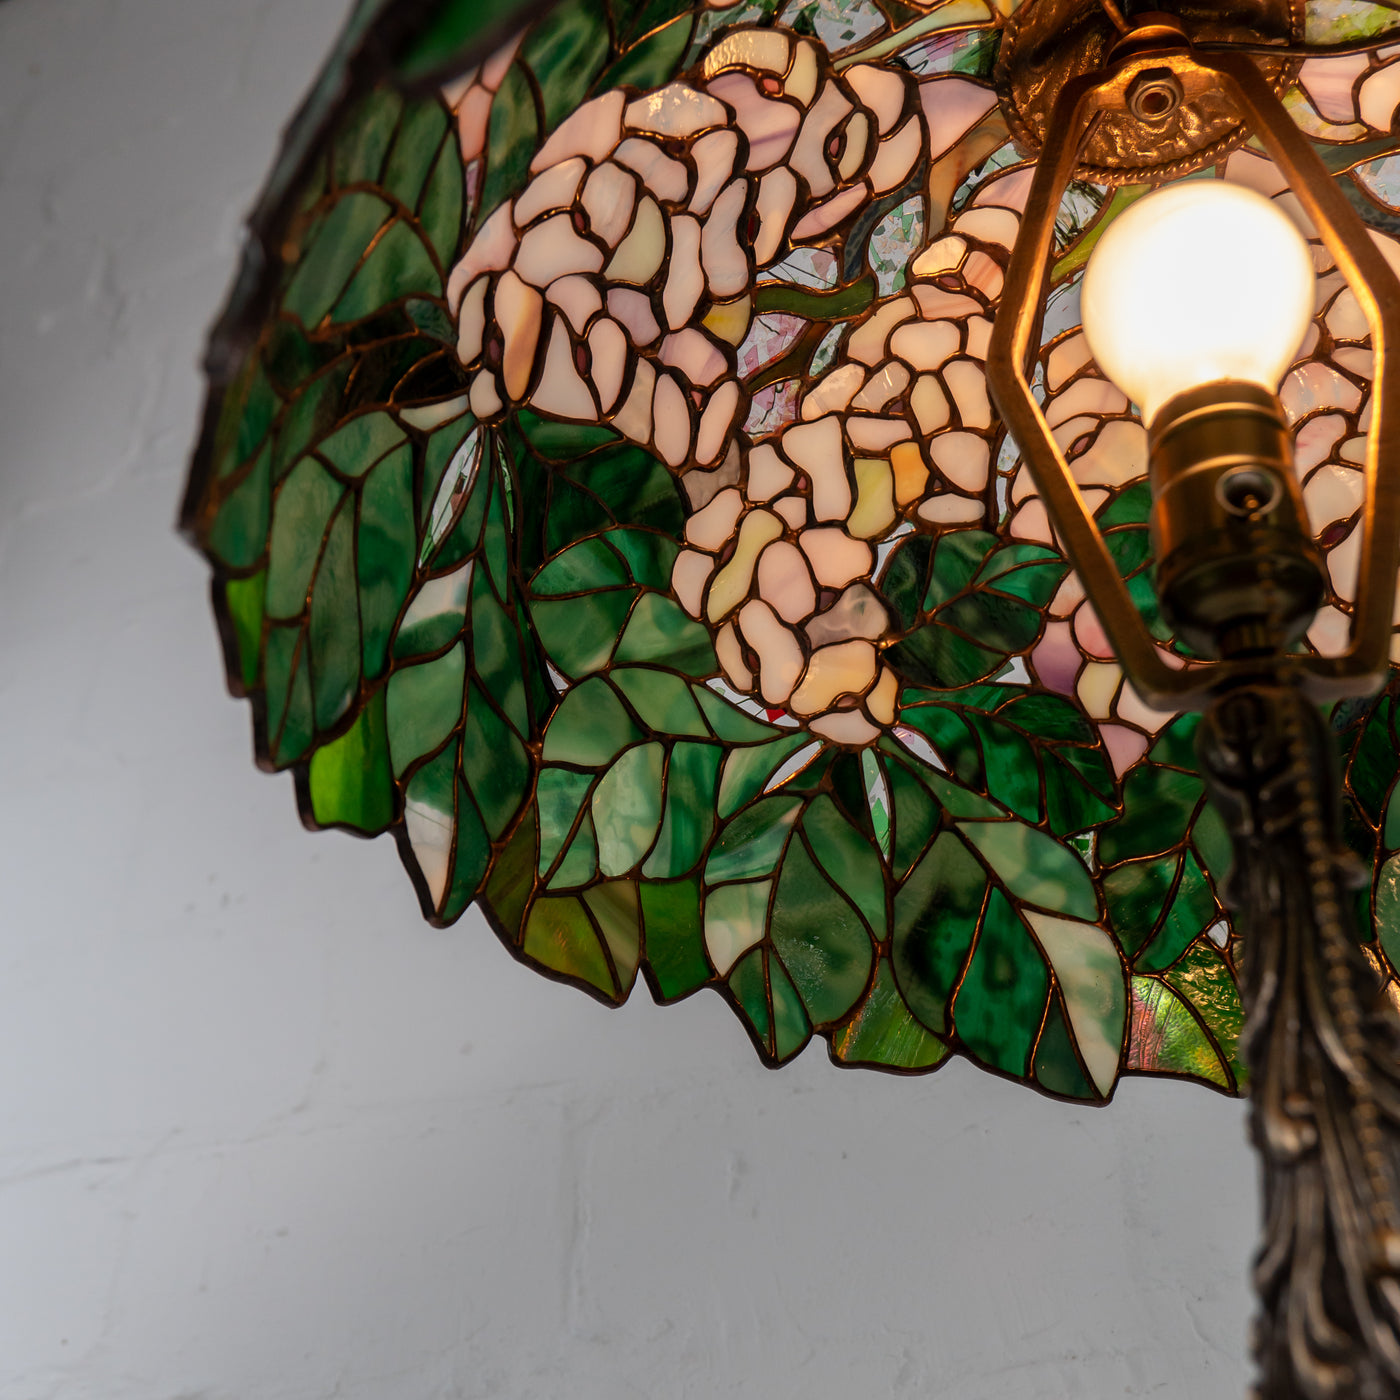 handmade glass flowers lampshade made of stained glass